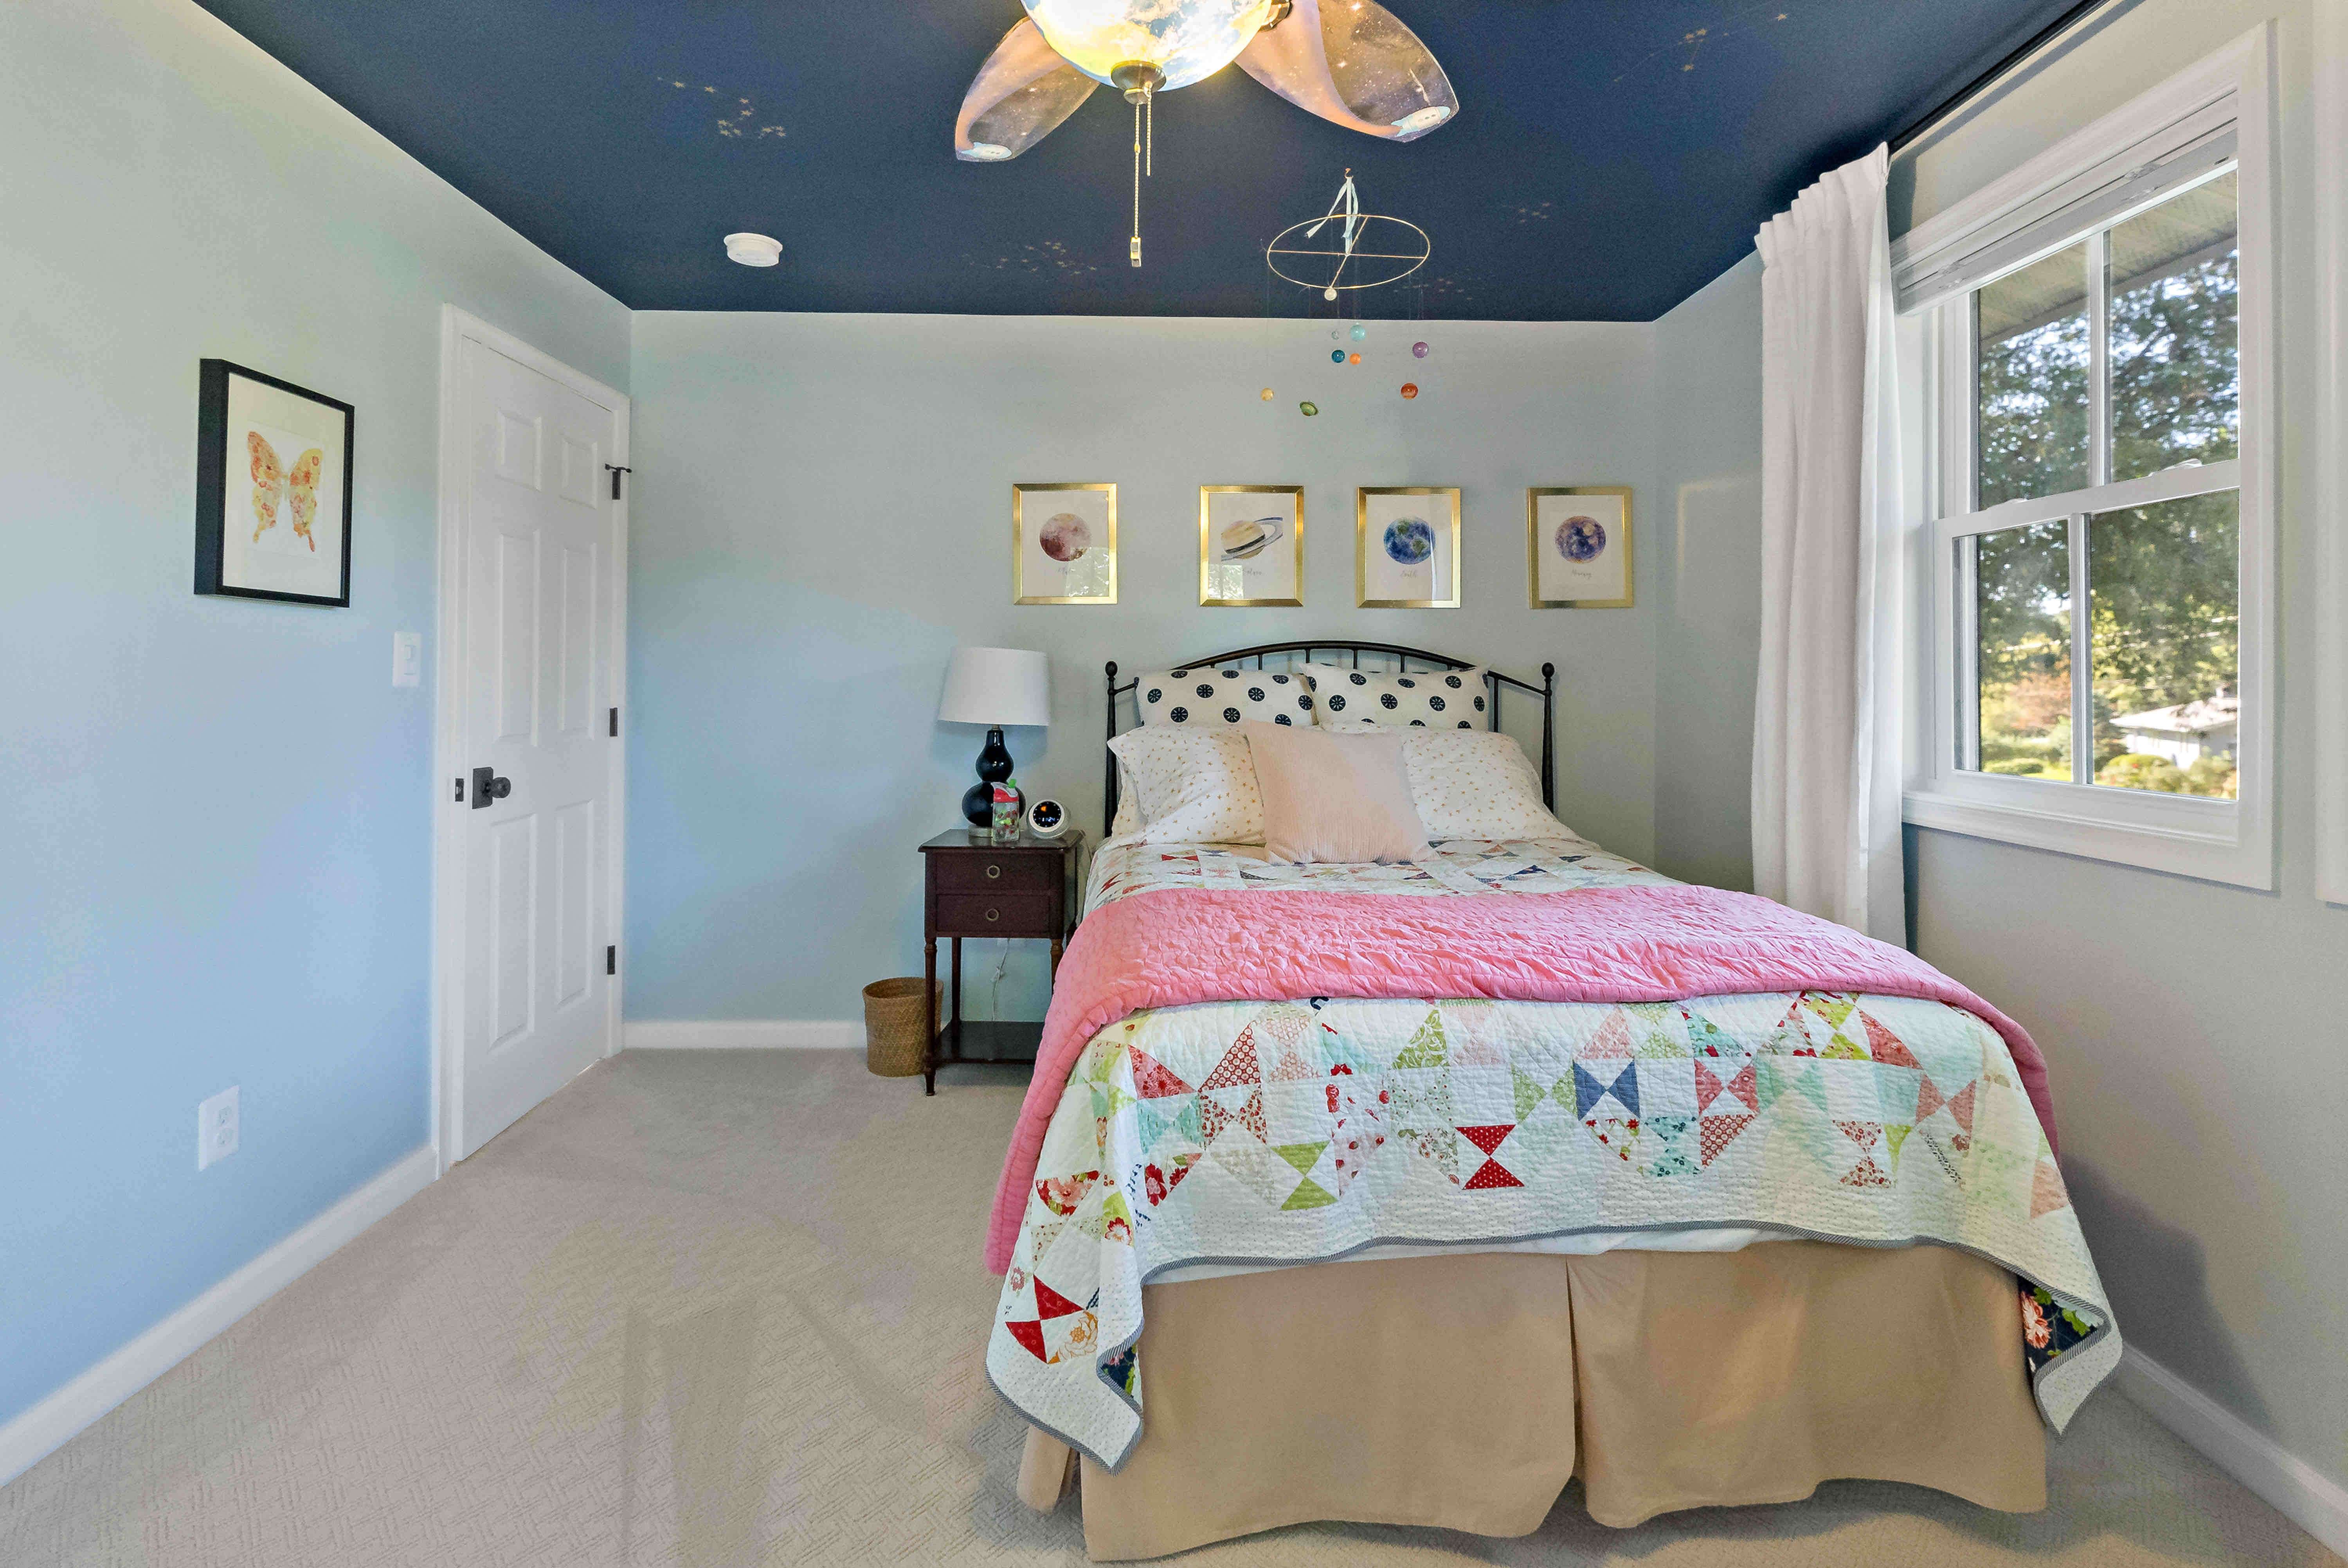 Girls bedroom with ceiling fan and blue ceiling